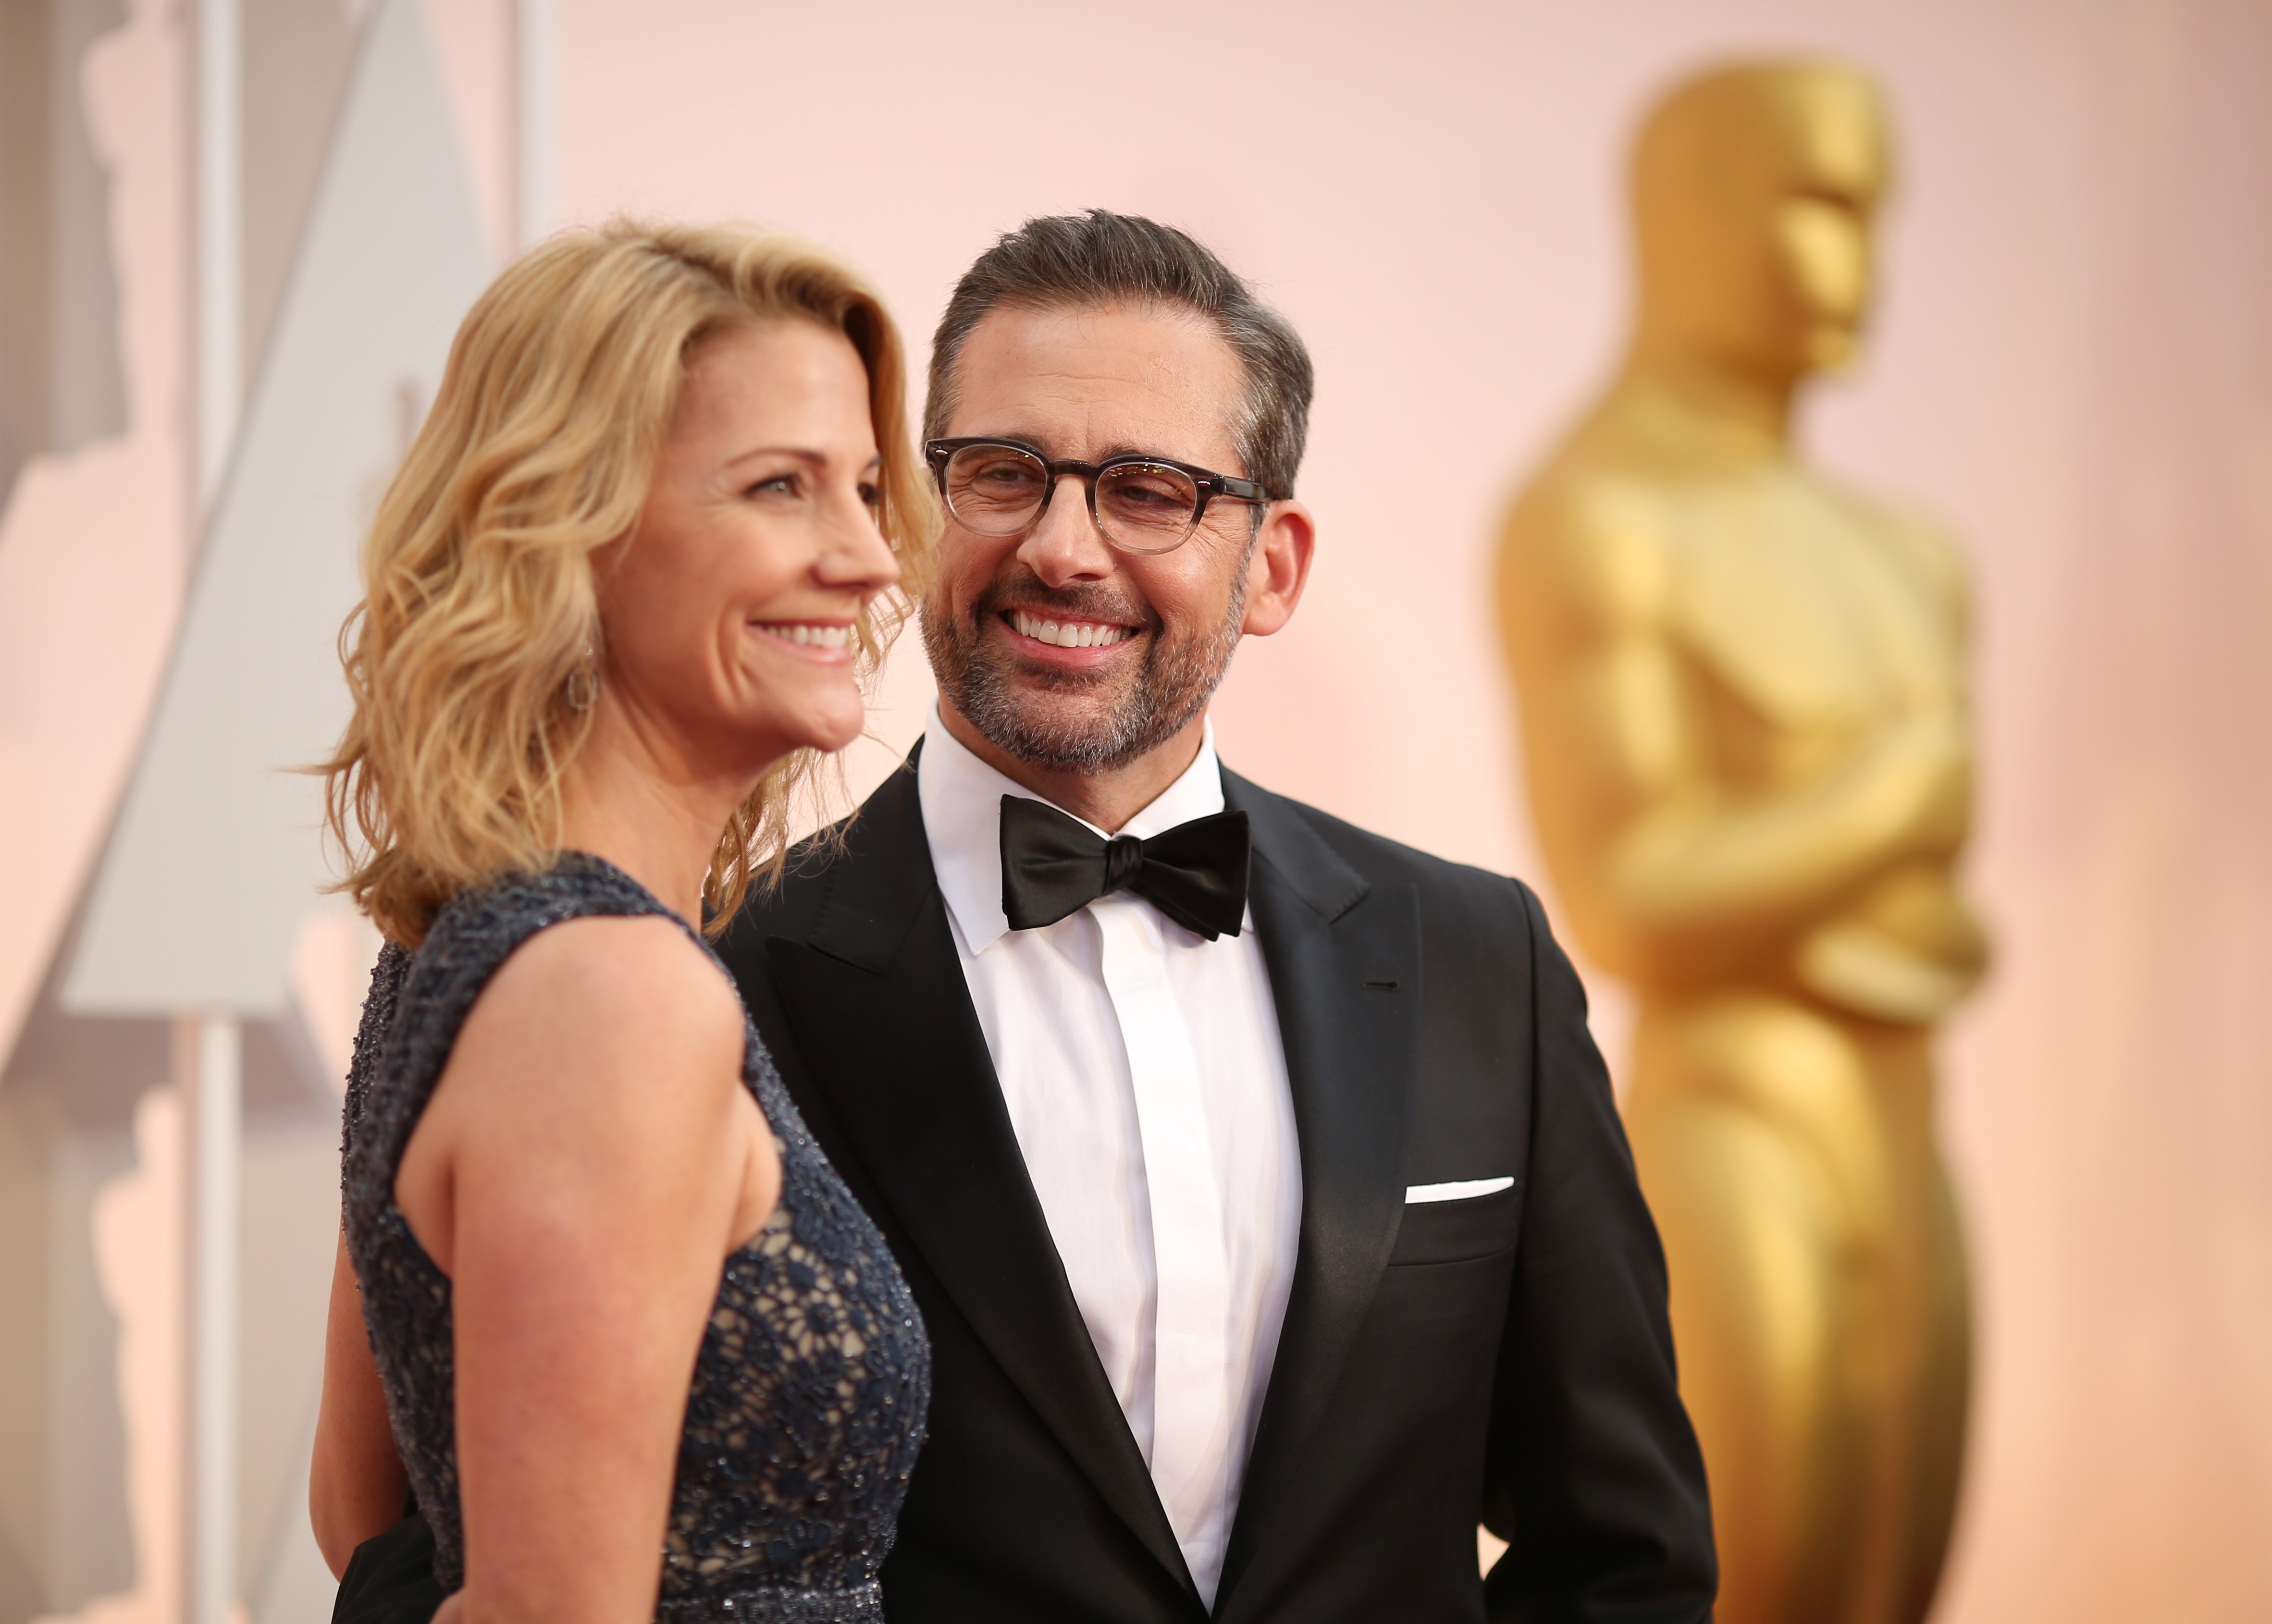  Steve Carell and Nancy Carell attend the 87th Annual Academy Awards at Hollywood & Highland Center on February 22, 2015 in Hollywood, California. | Photo: GettyImages